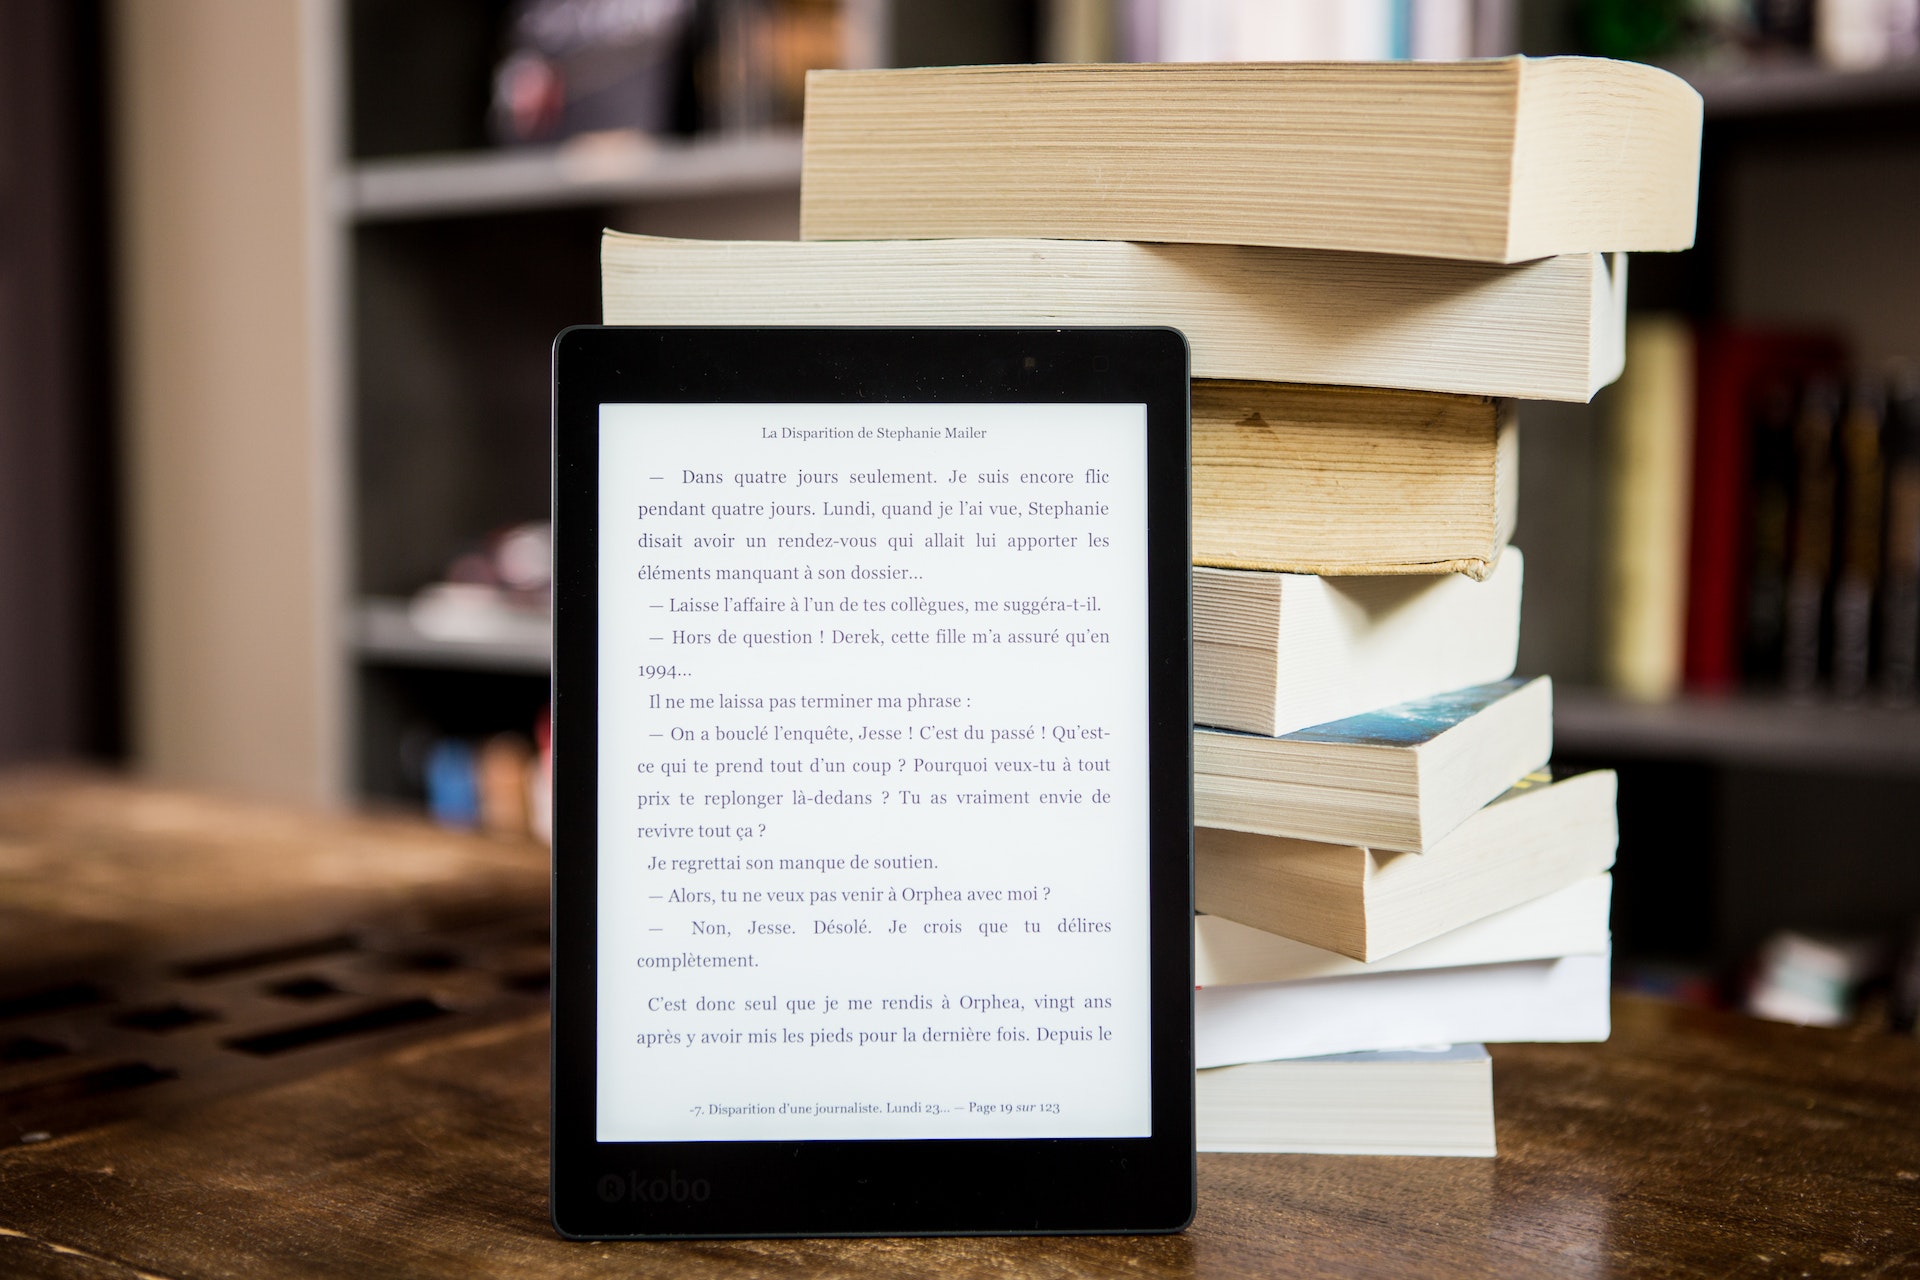 How to Successfully Start a Profitable Ebook Business from Home